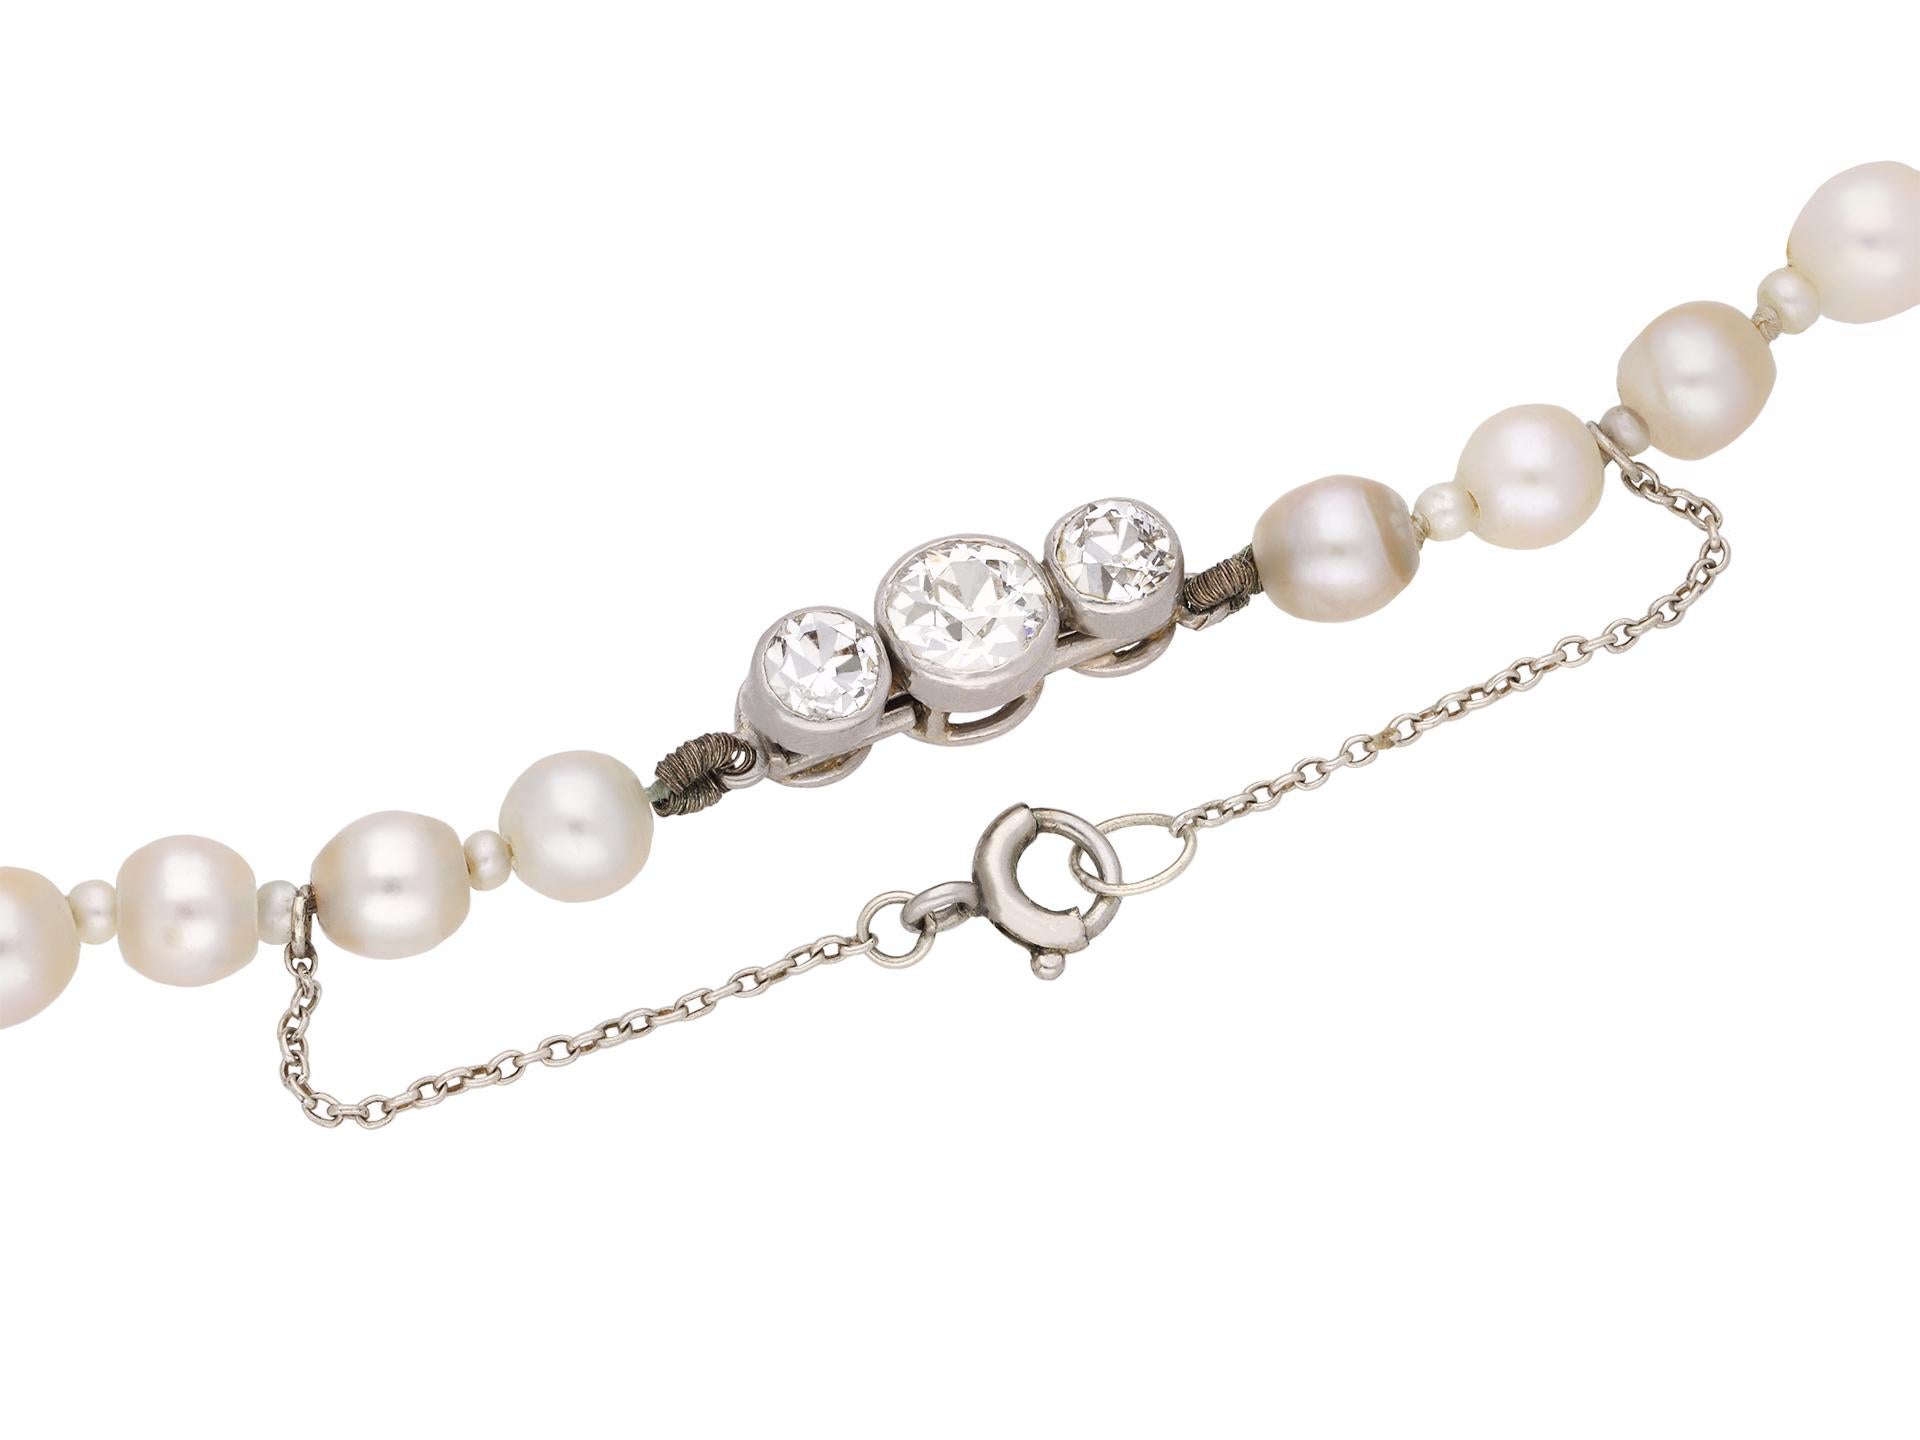 Natural pearl and diamond necklace. Set with one hundred and twenty one natural saltwater pearls, measurements ranging from approximately 1.6mm to 6.7mm, clasp set with three round old cut diamonds in open back rubover settings with an approximate